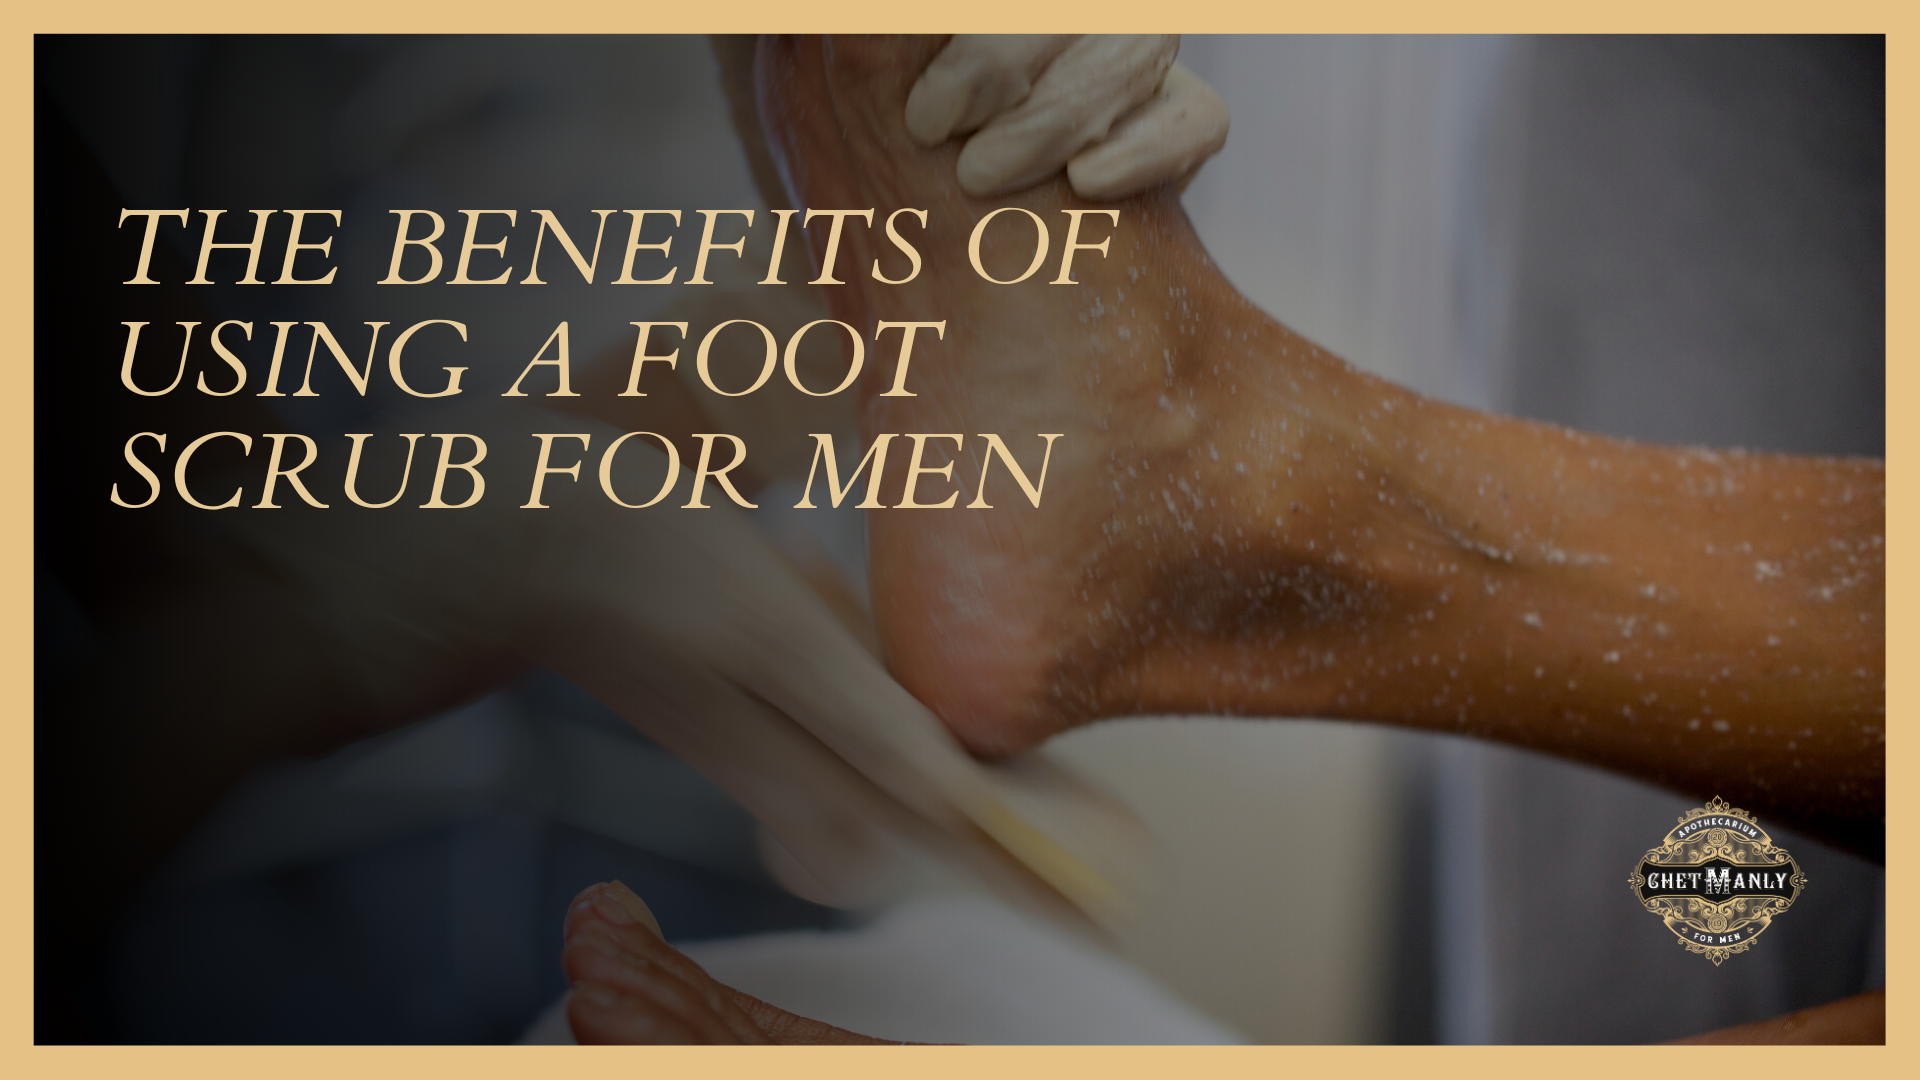 The Benefits of Using a Foot Scrub for Men